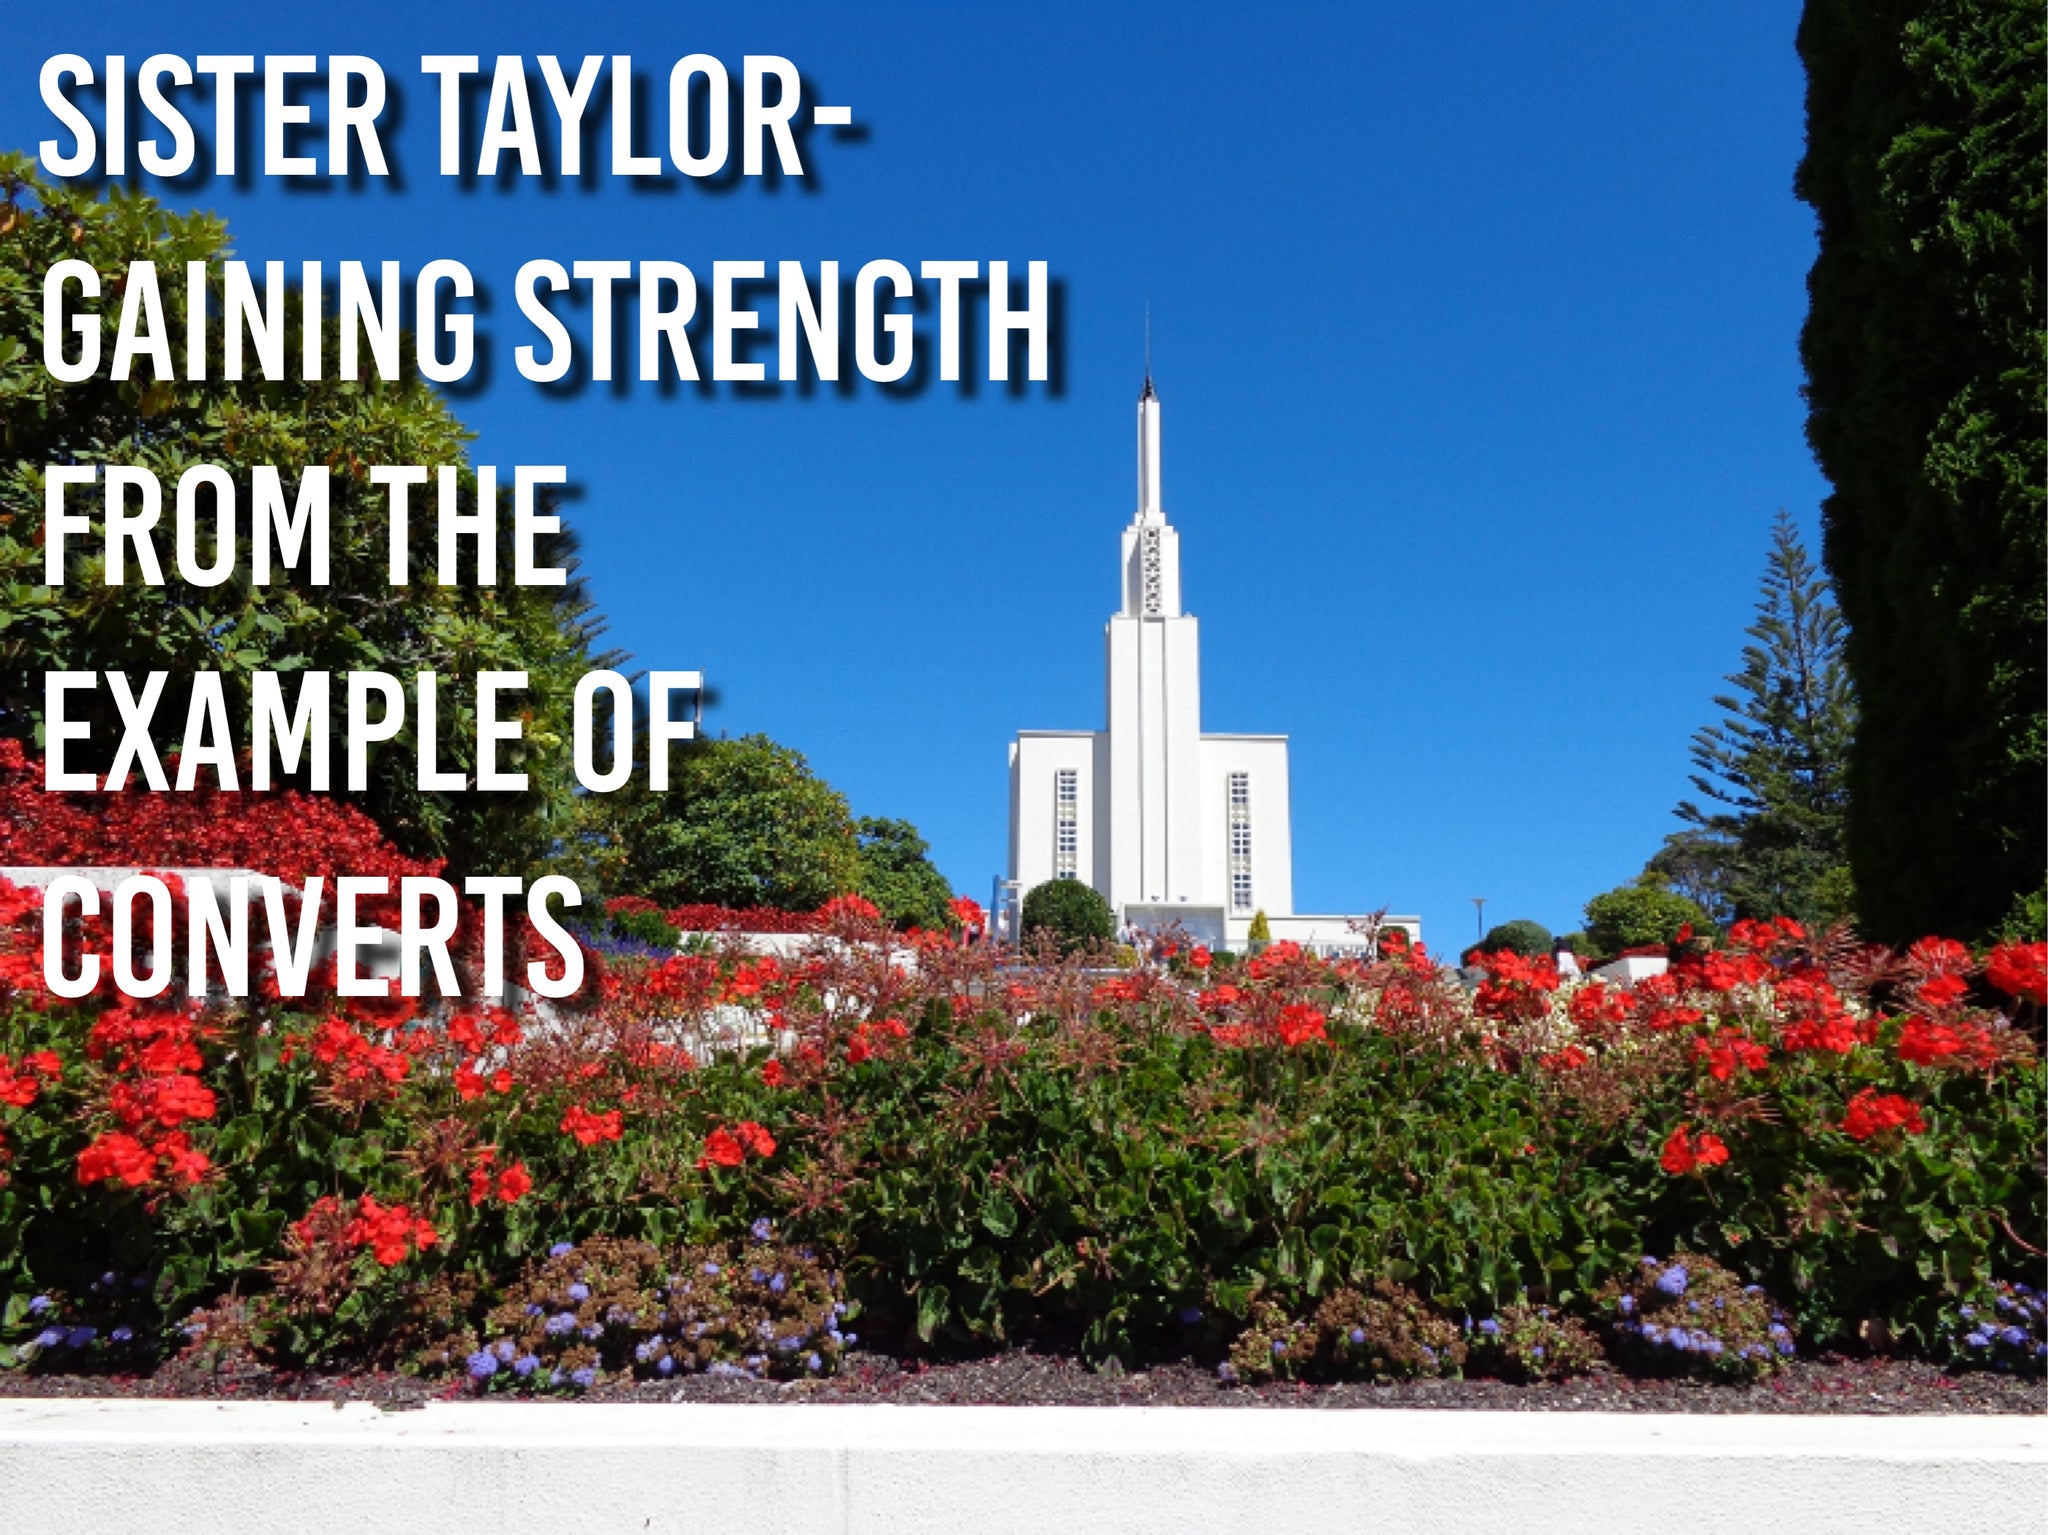 Sister Taylor-Gaining Strength from the Example of Converts